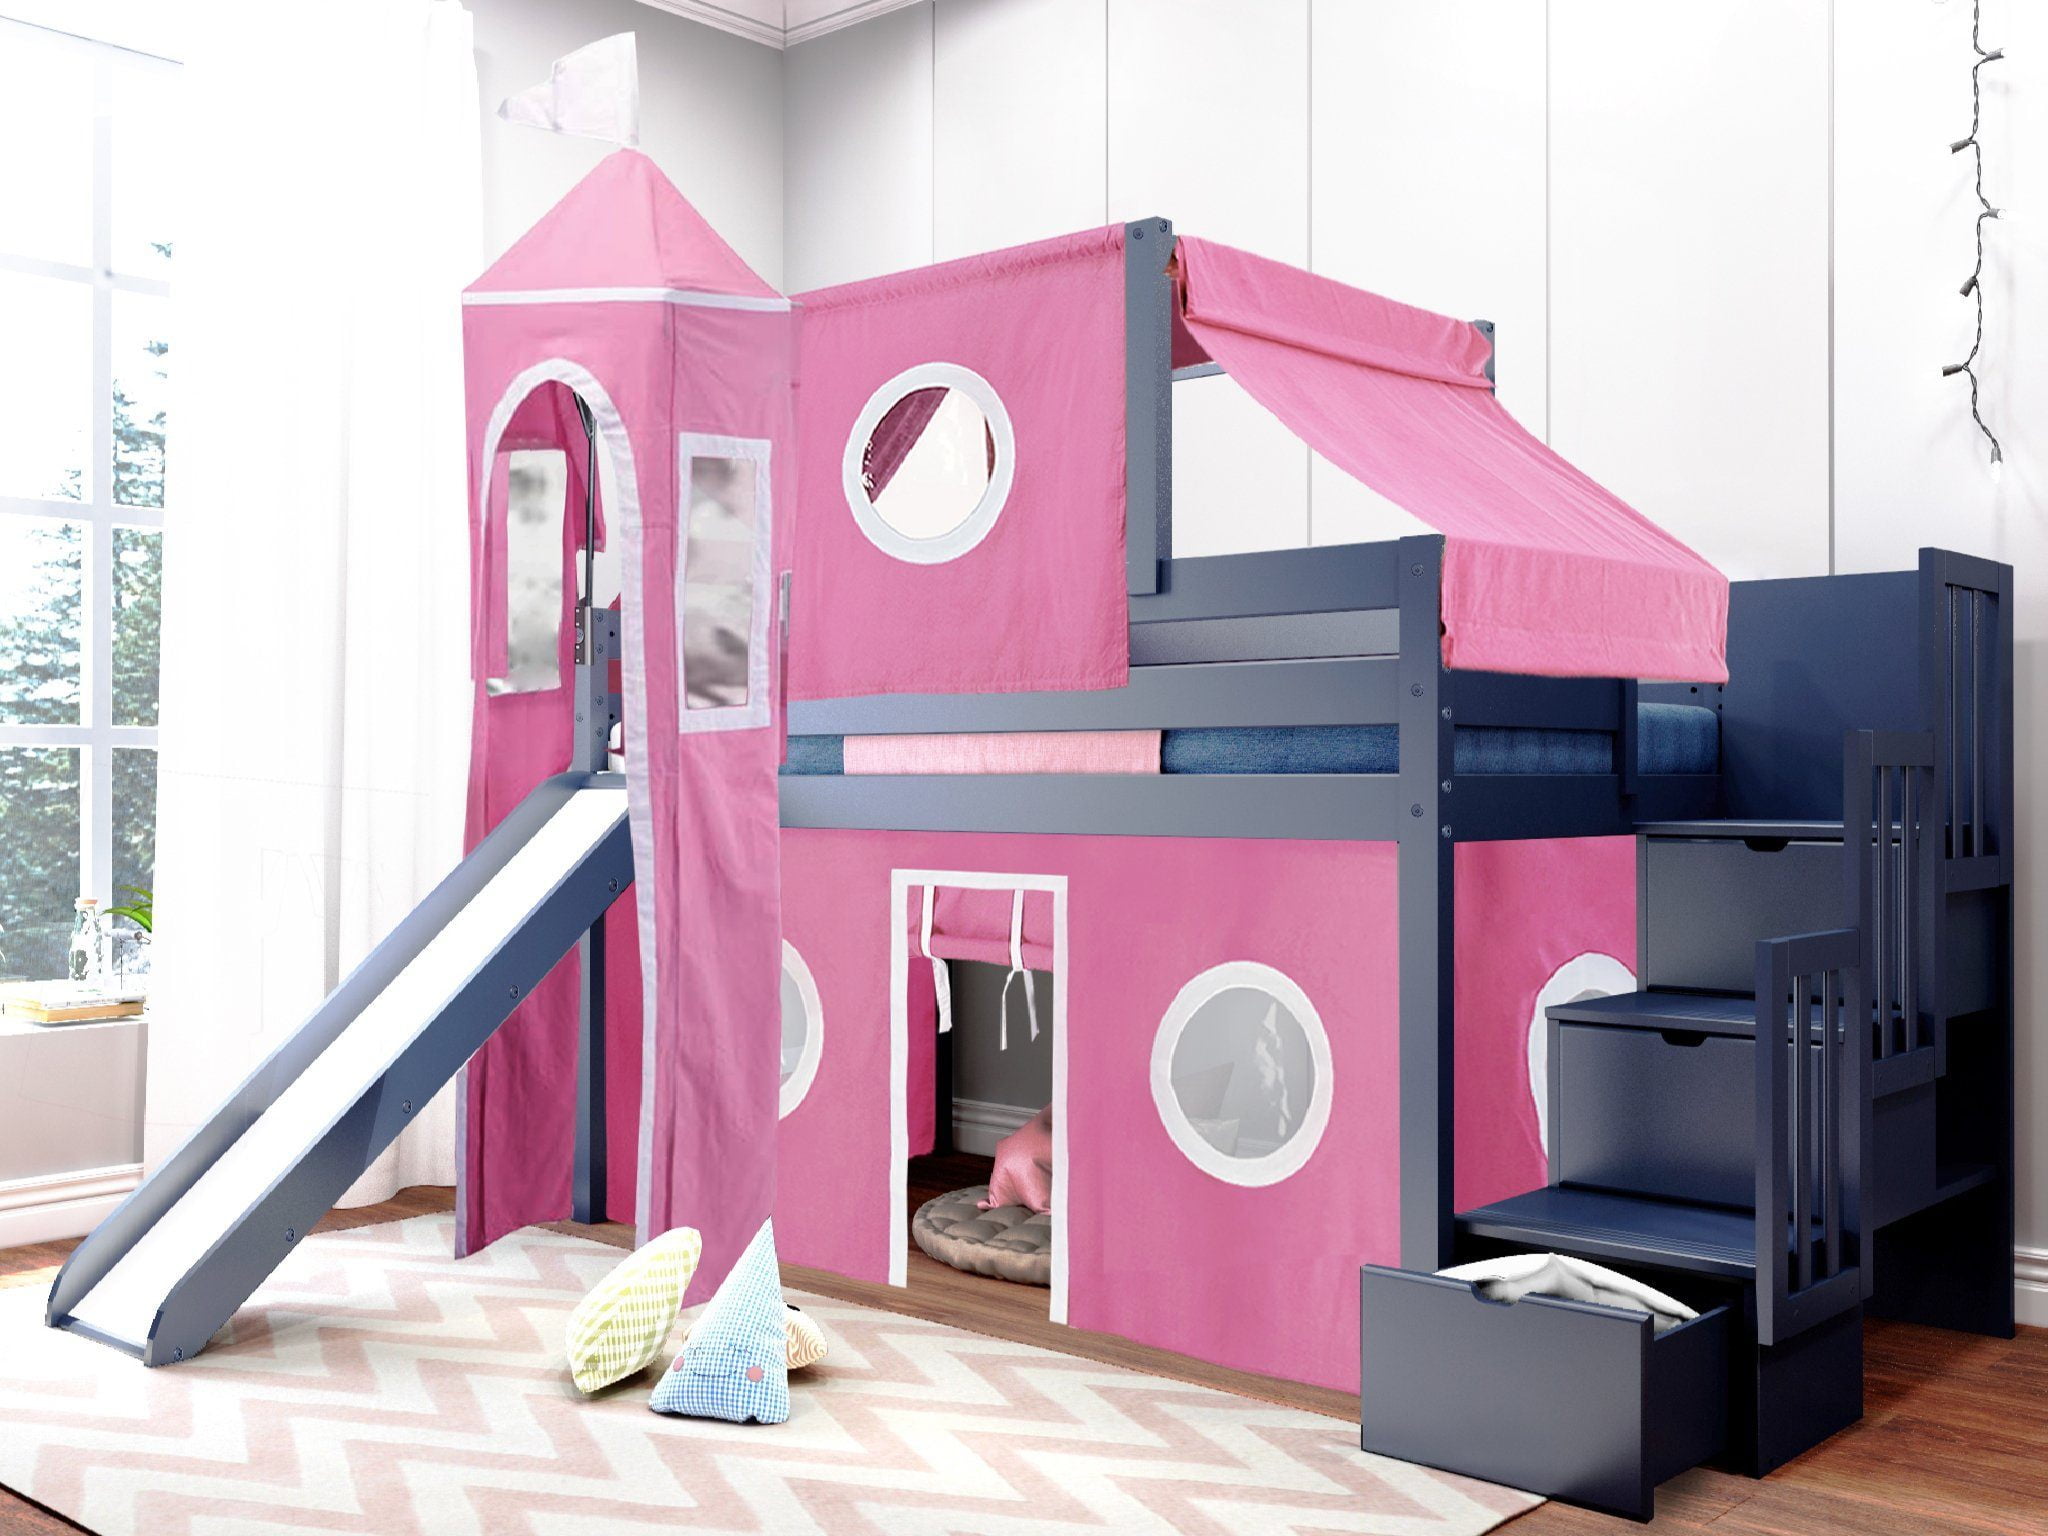 Jackpot Princess Low Loft Stairway Bed With Slide Pink And White Tent